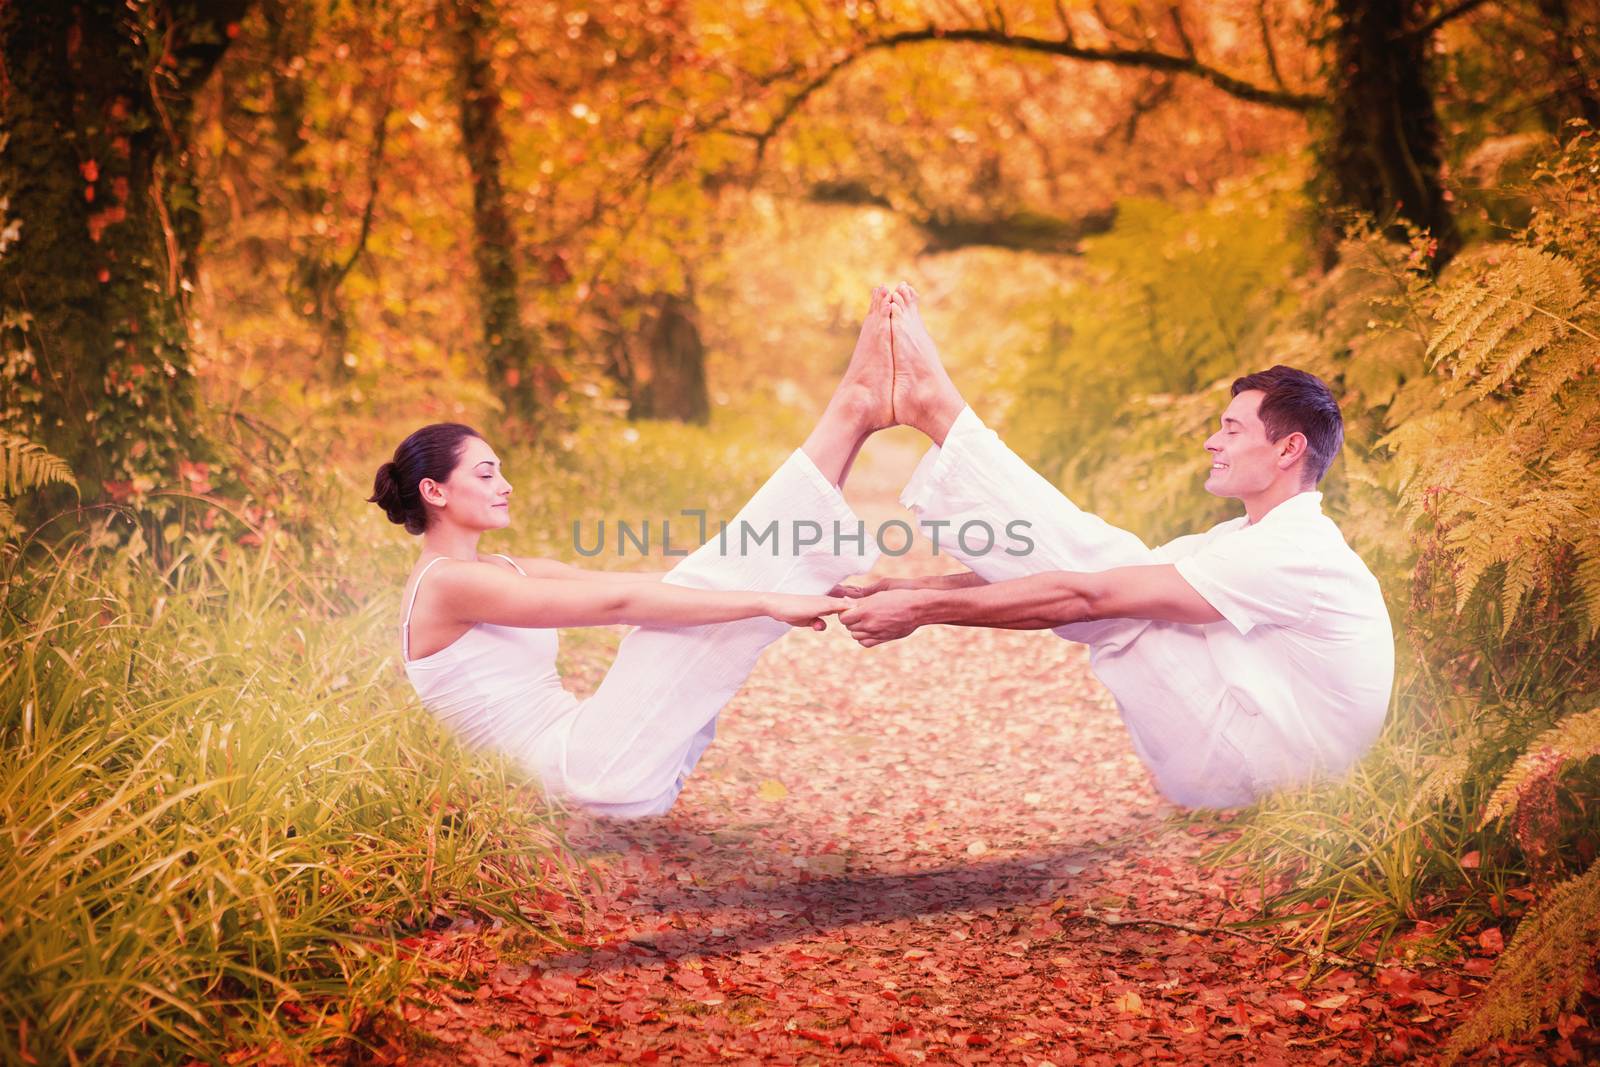 Peaceful couple sitting in boat position together against peaceful autumn scene in forest